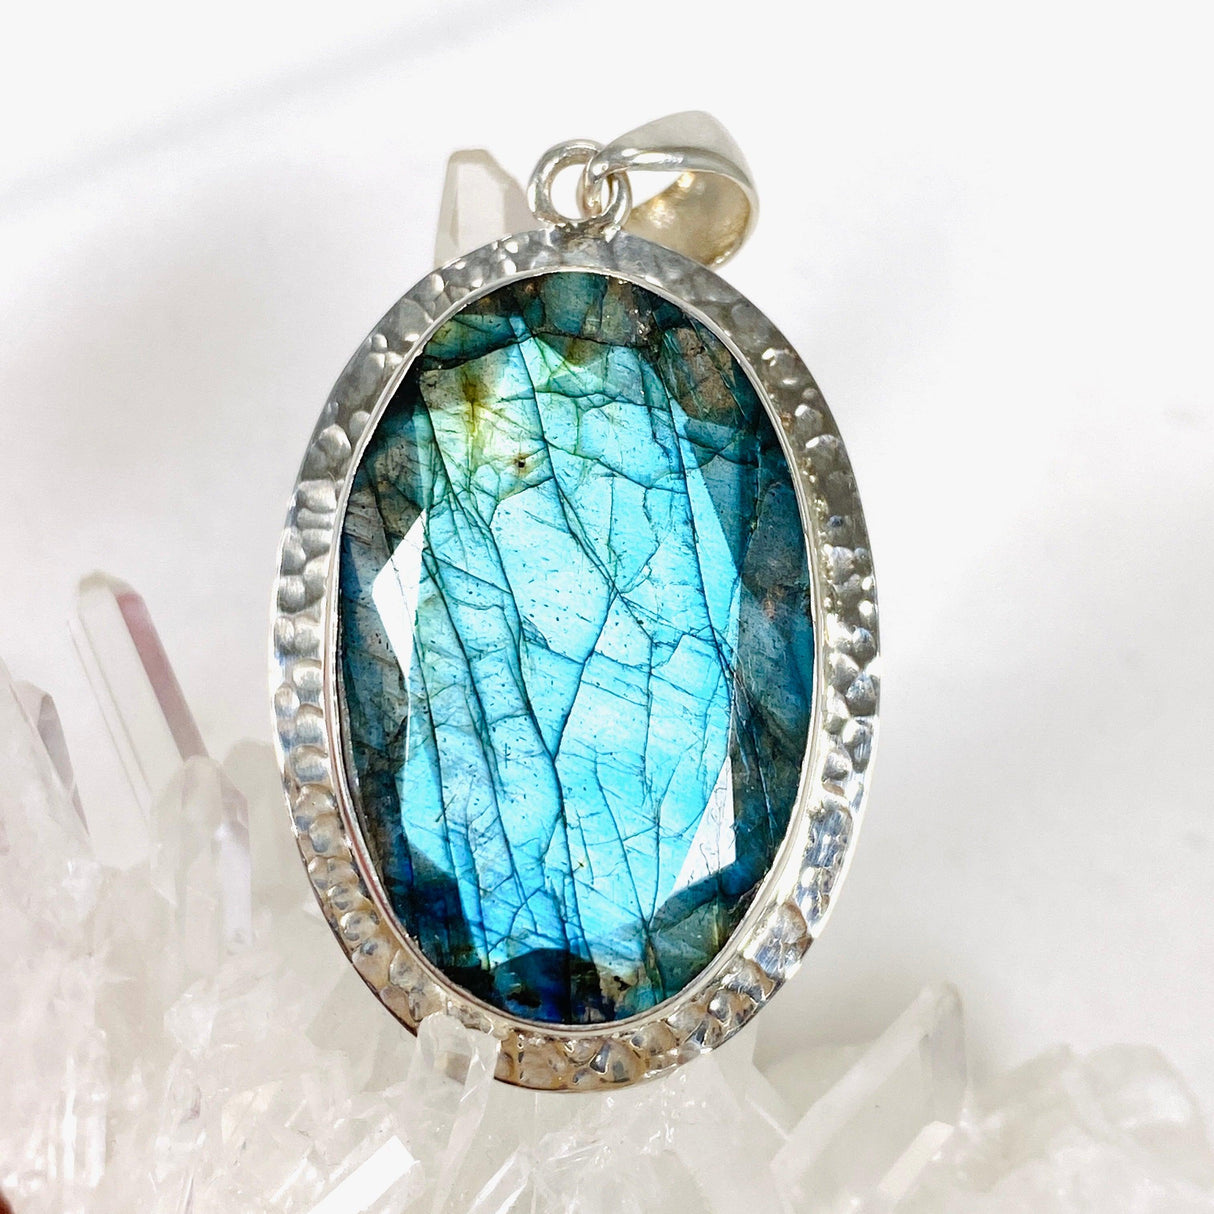 Blue iridescent Labradorite faceted gemstone and silver pendant on a clear quartz crystal